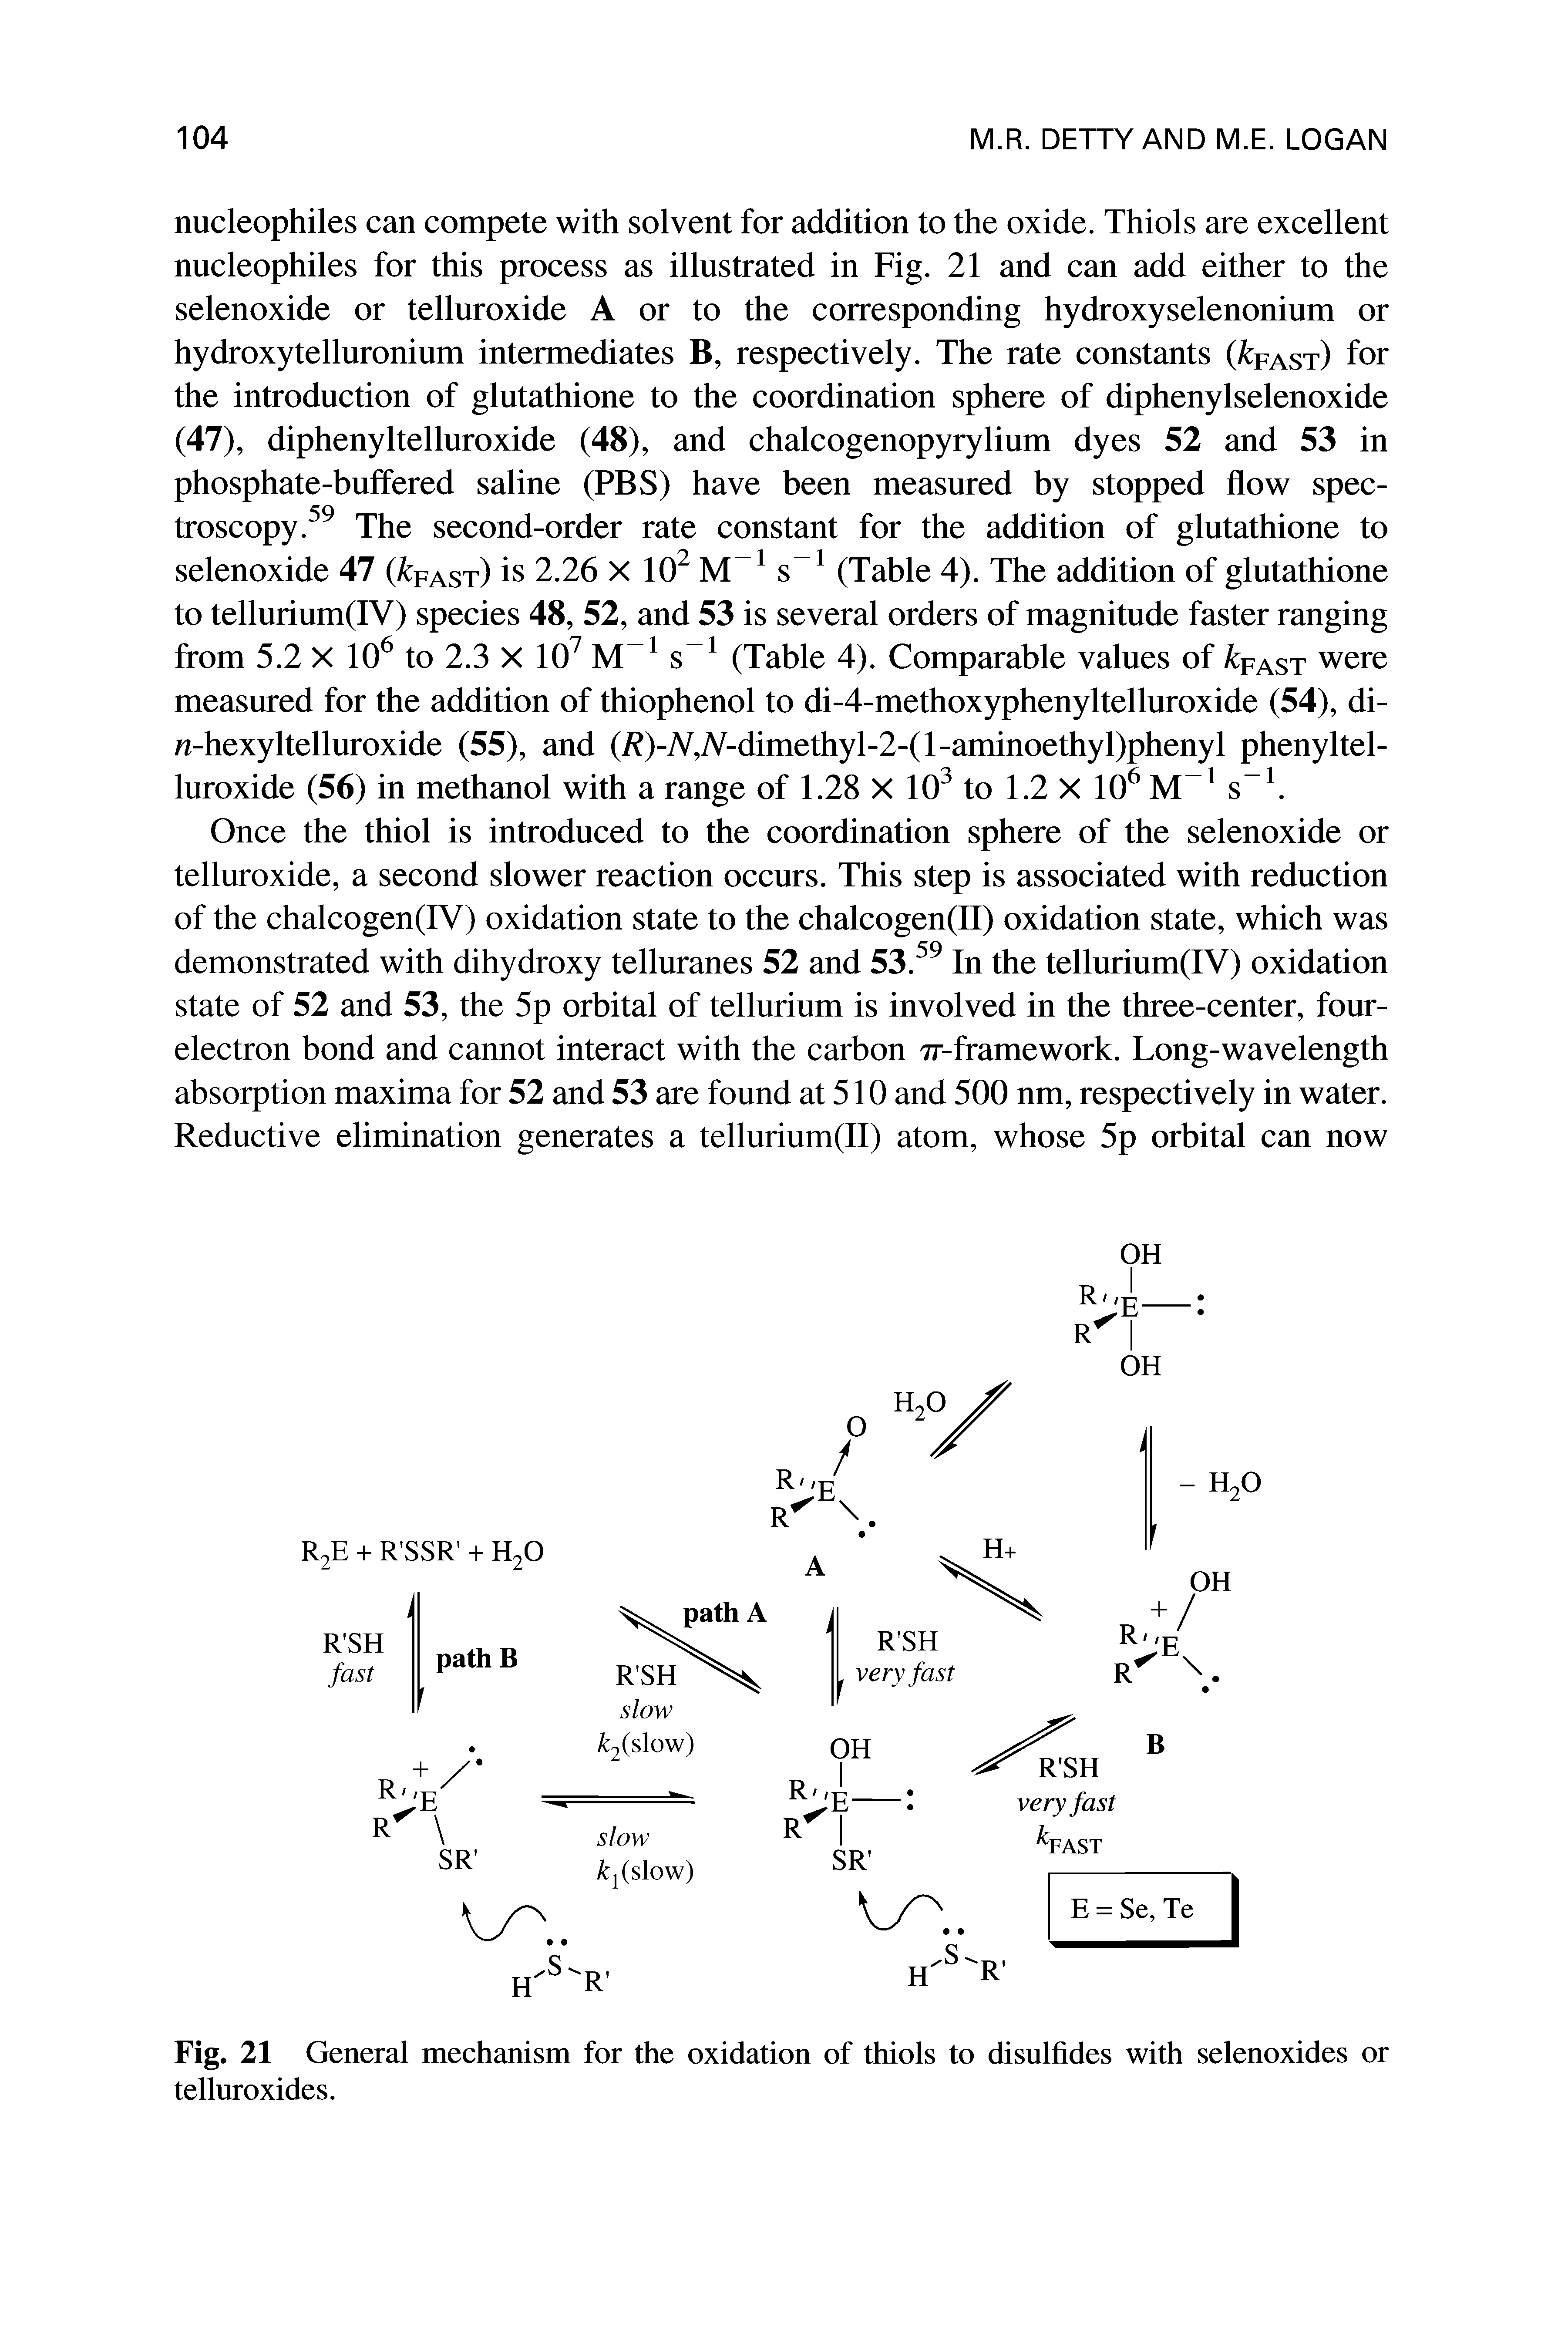 Fig. 21 General mechanism for the oxidation of thiols to disulfides with selenoxides or telluroxides.